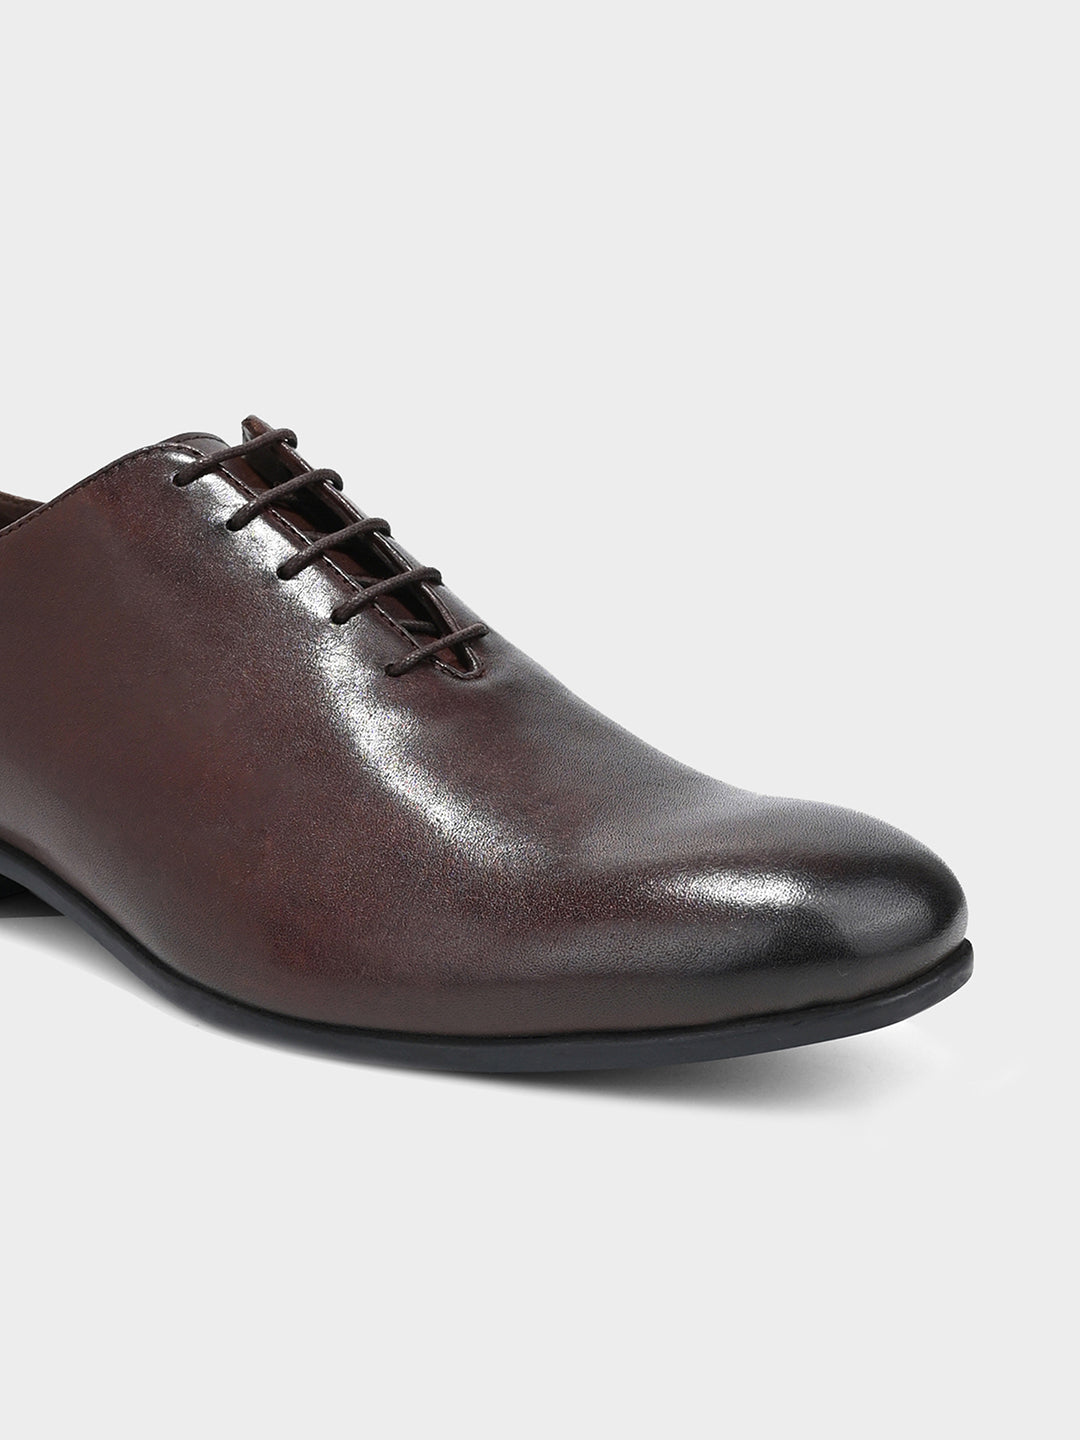 Men's Brown Leather Lace-Up Oxford Shoes